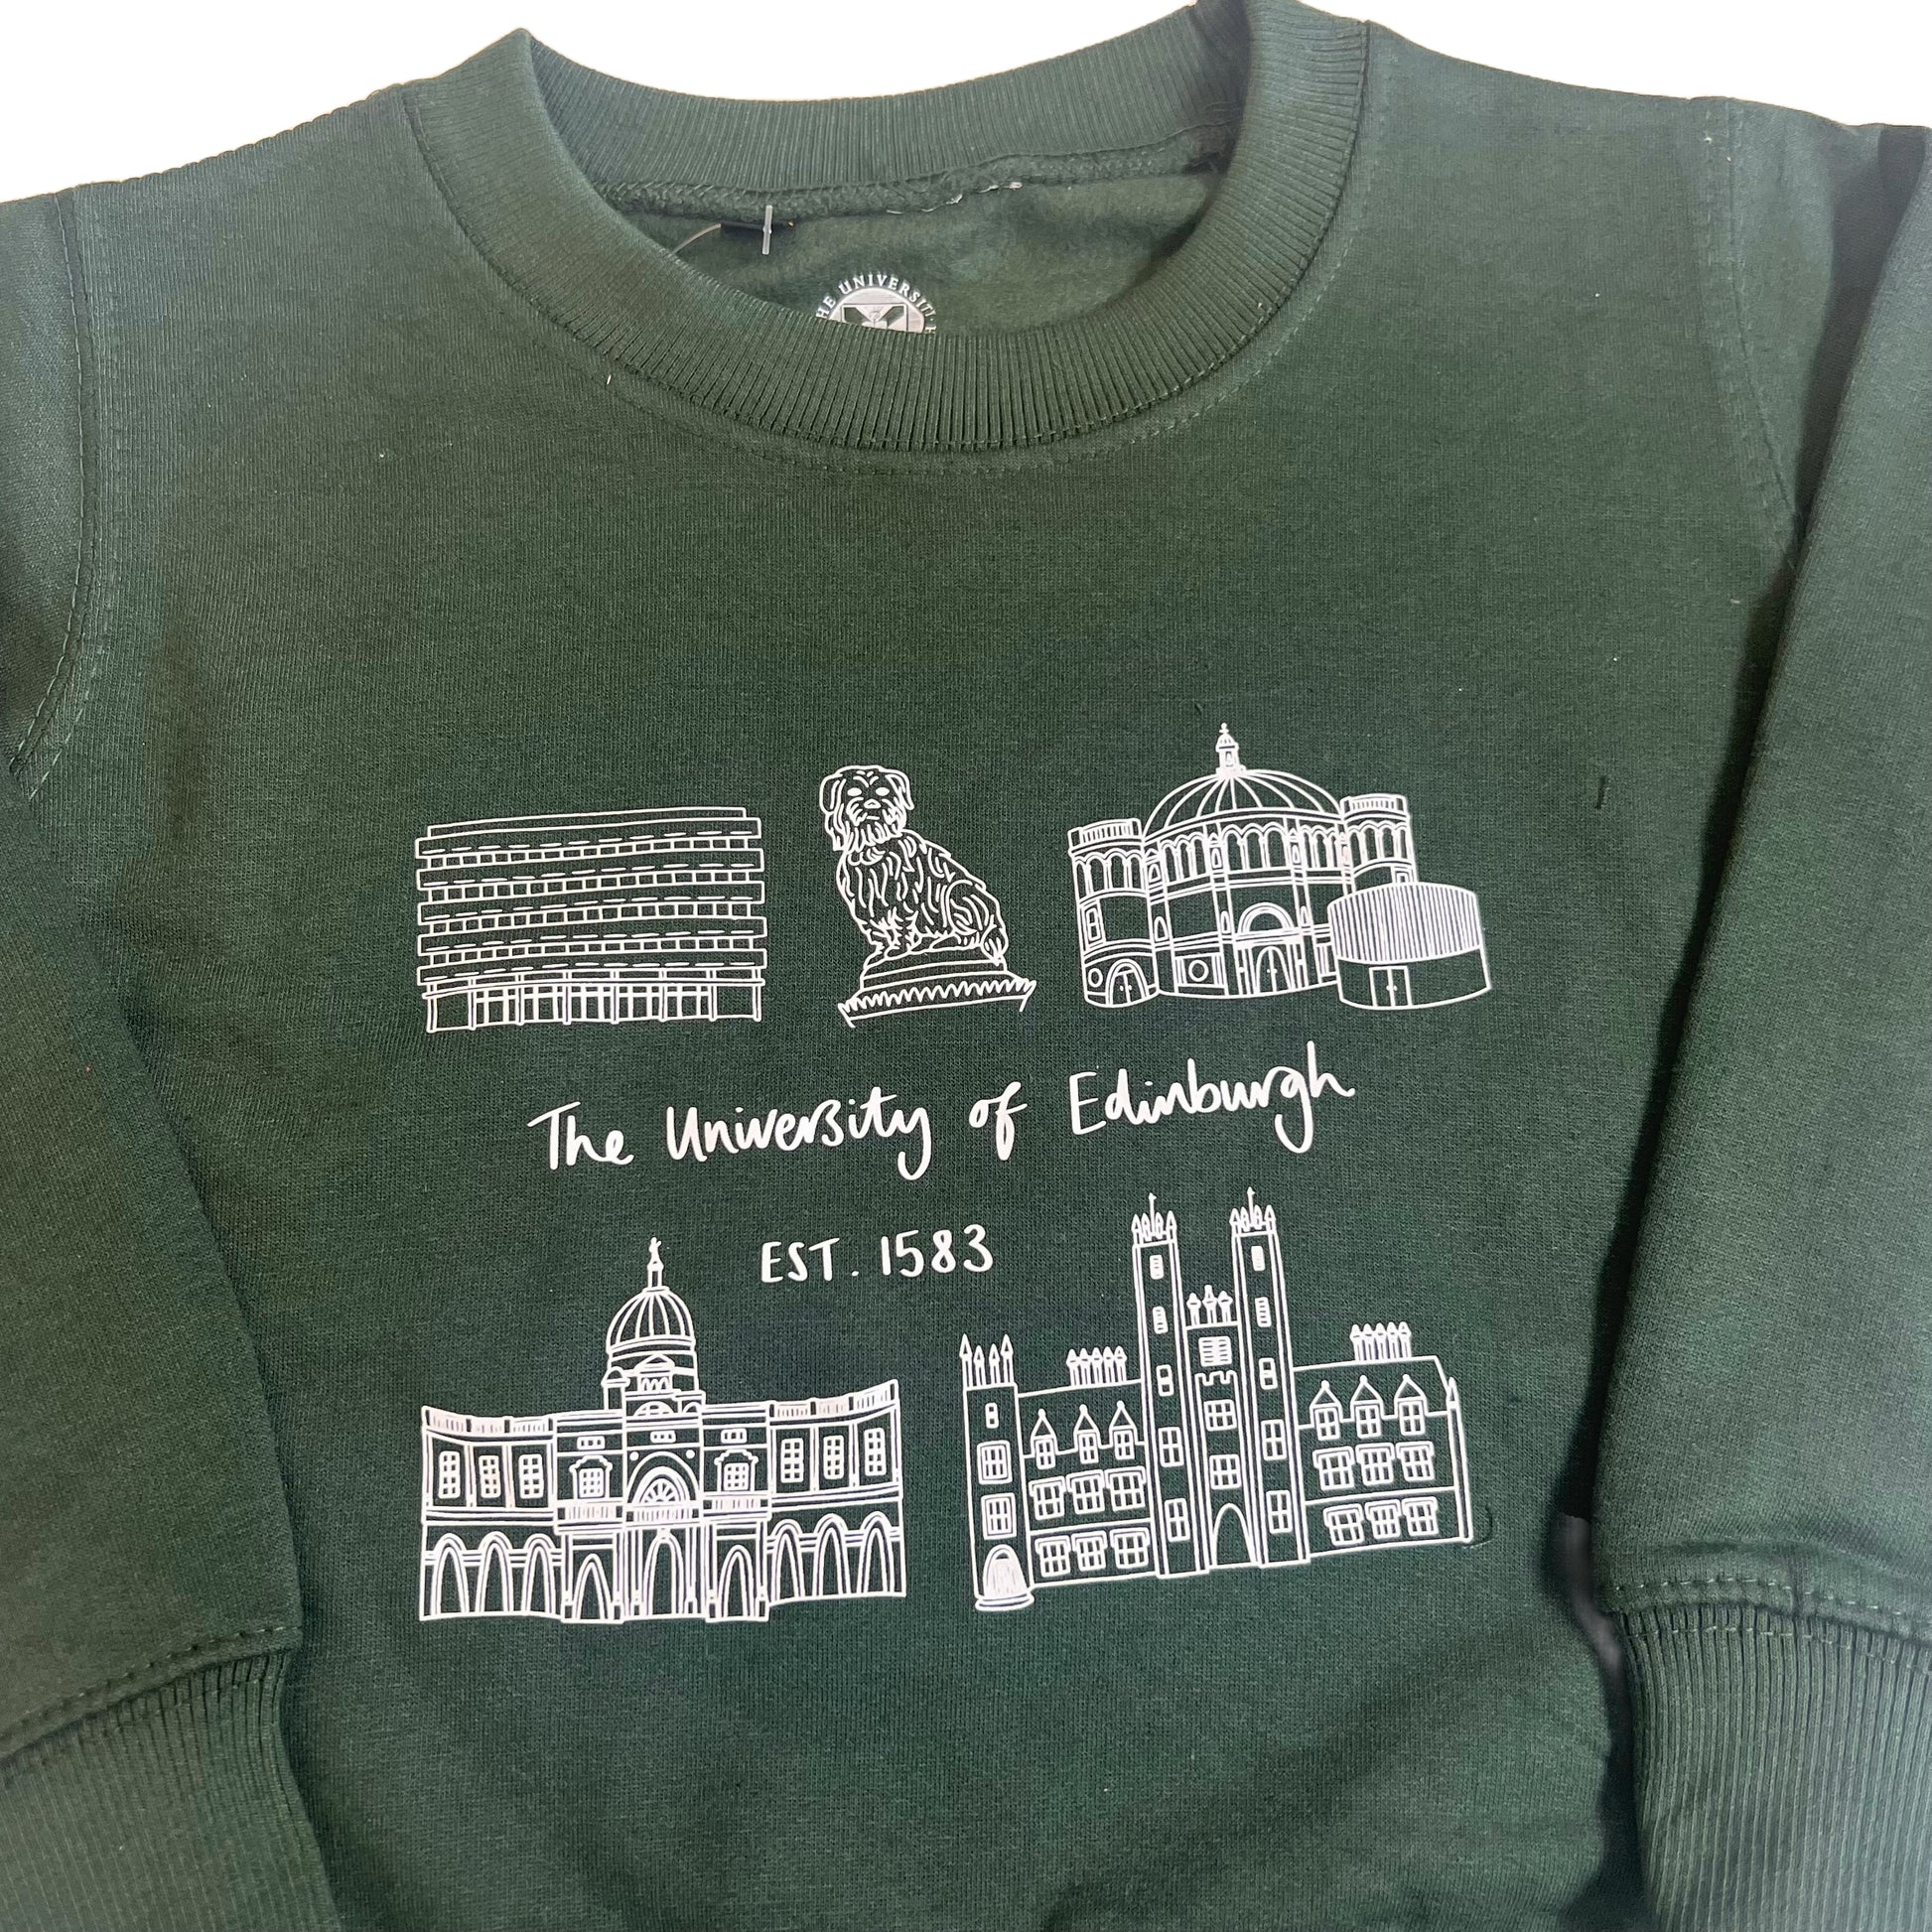 Light blue sweatshirt with white illustration of the main library, greyfriars bobby, mcewan hall, old college, new college, and text saying 'the university of edinburgh established 1583